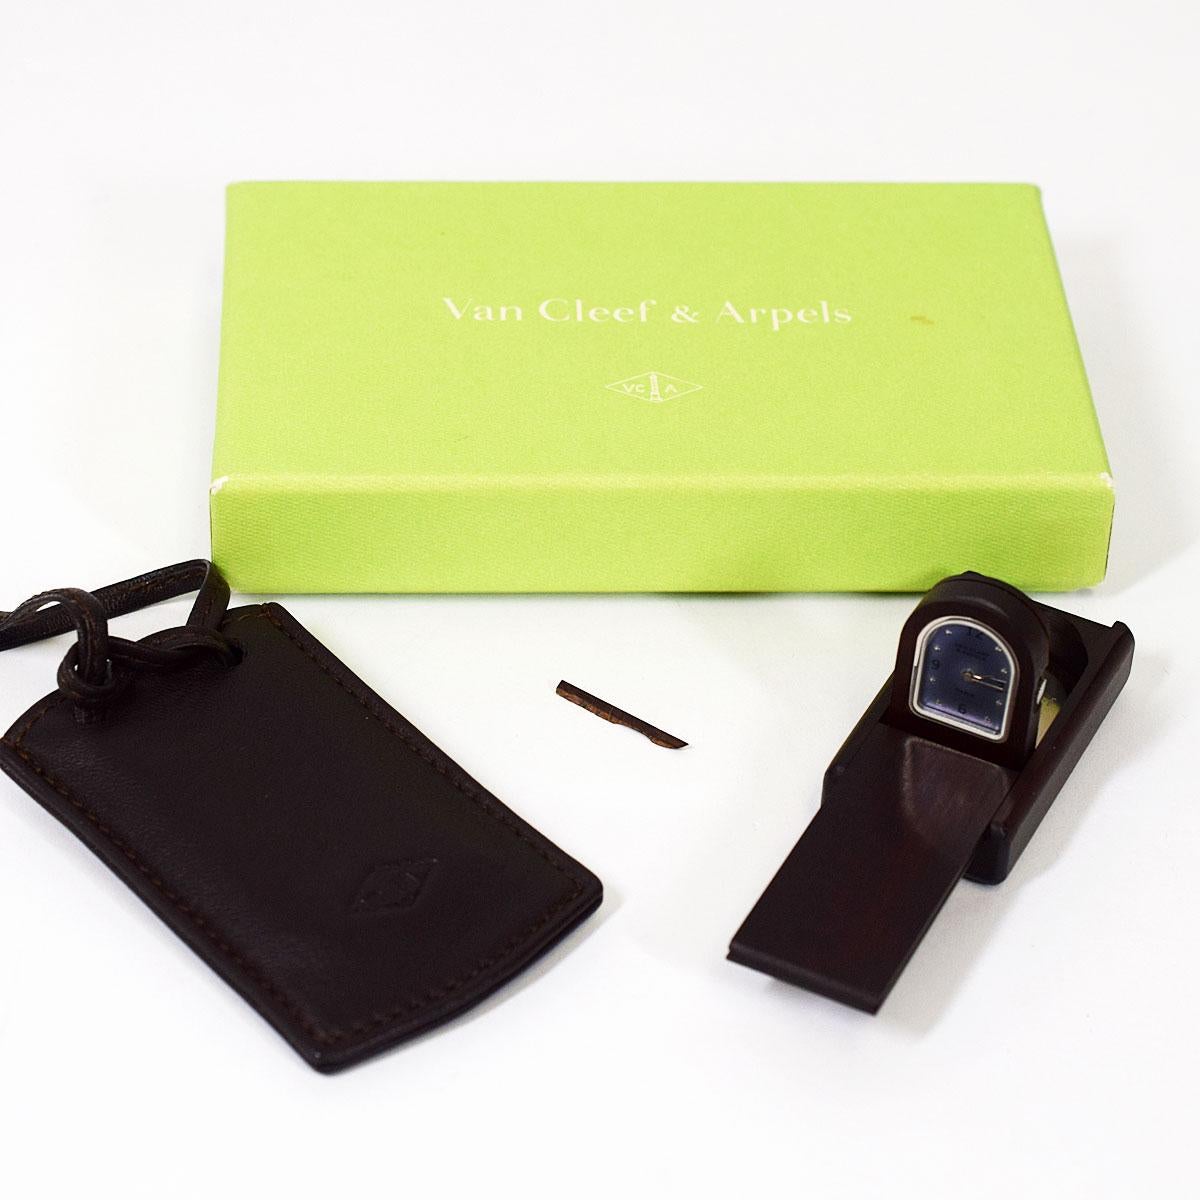 Van Cleef &Arpels Domino Clock Black Shell Wood Stainless Quartz Limited to 2001 For Sale 1